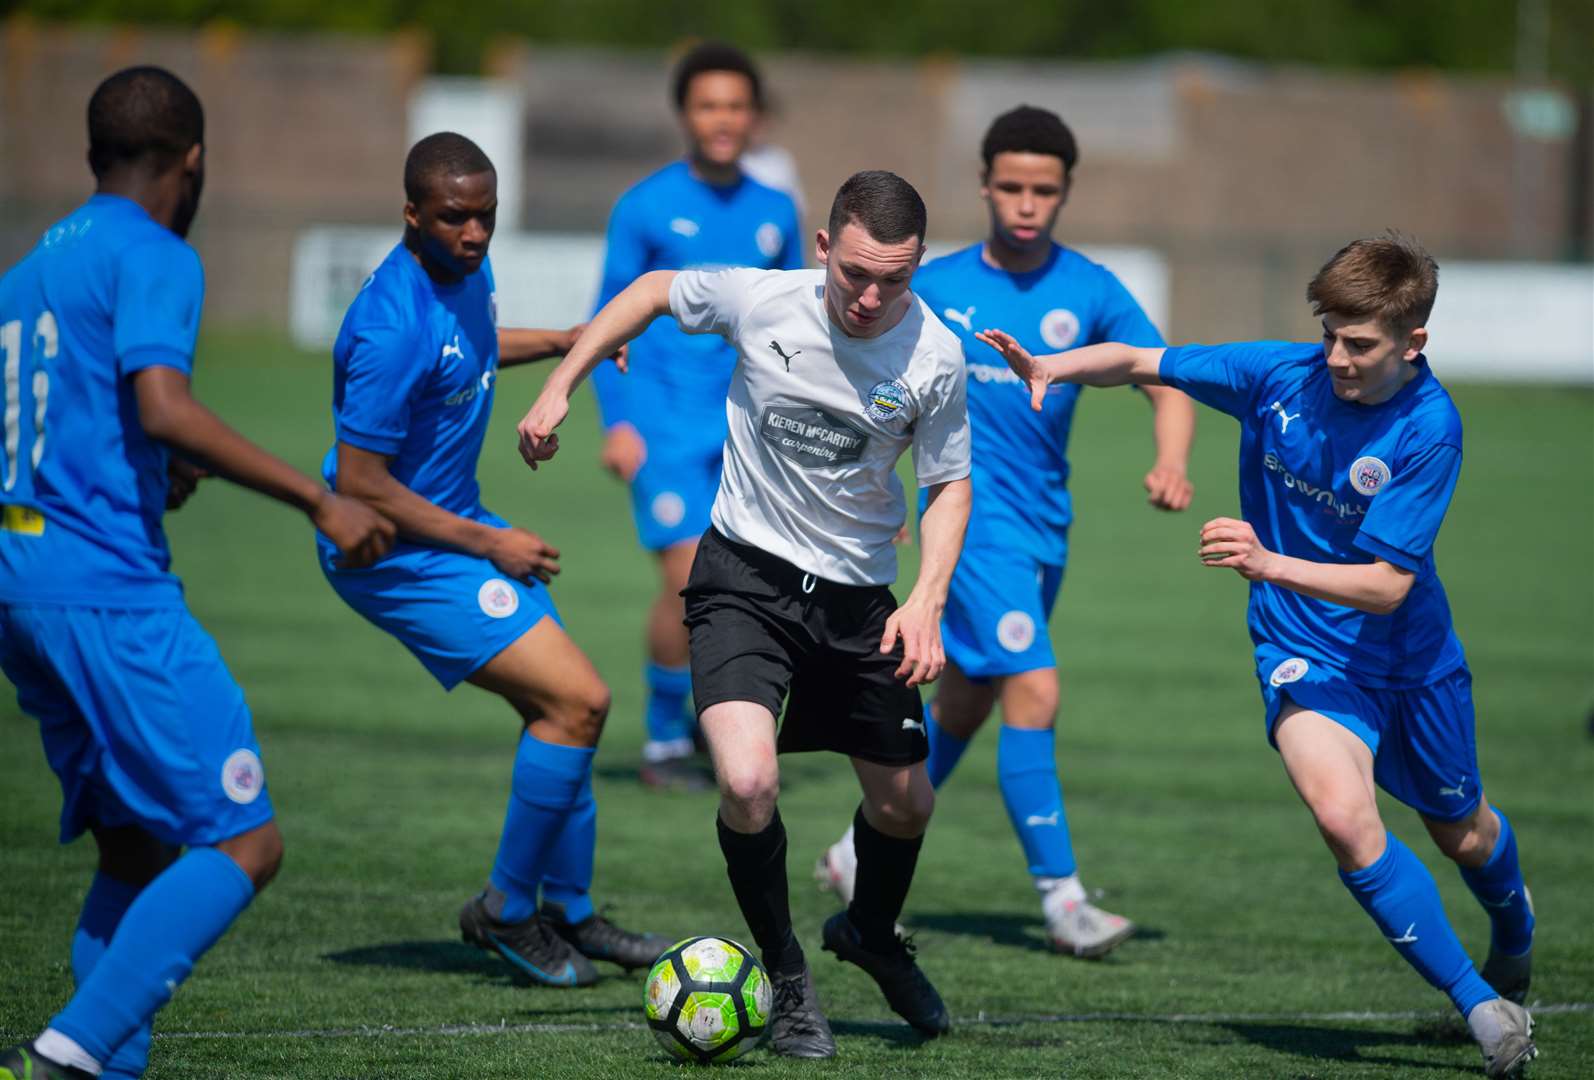 Dover Athletic under-16s (white) find themselves crowded out against Bromley under-16s. Picture: PSP Images